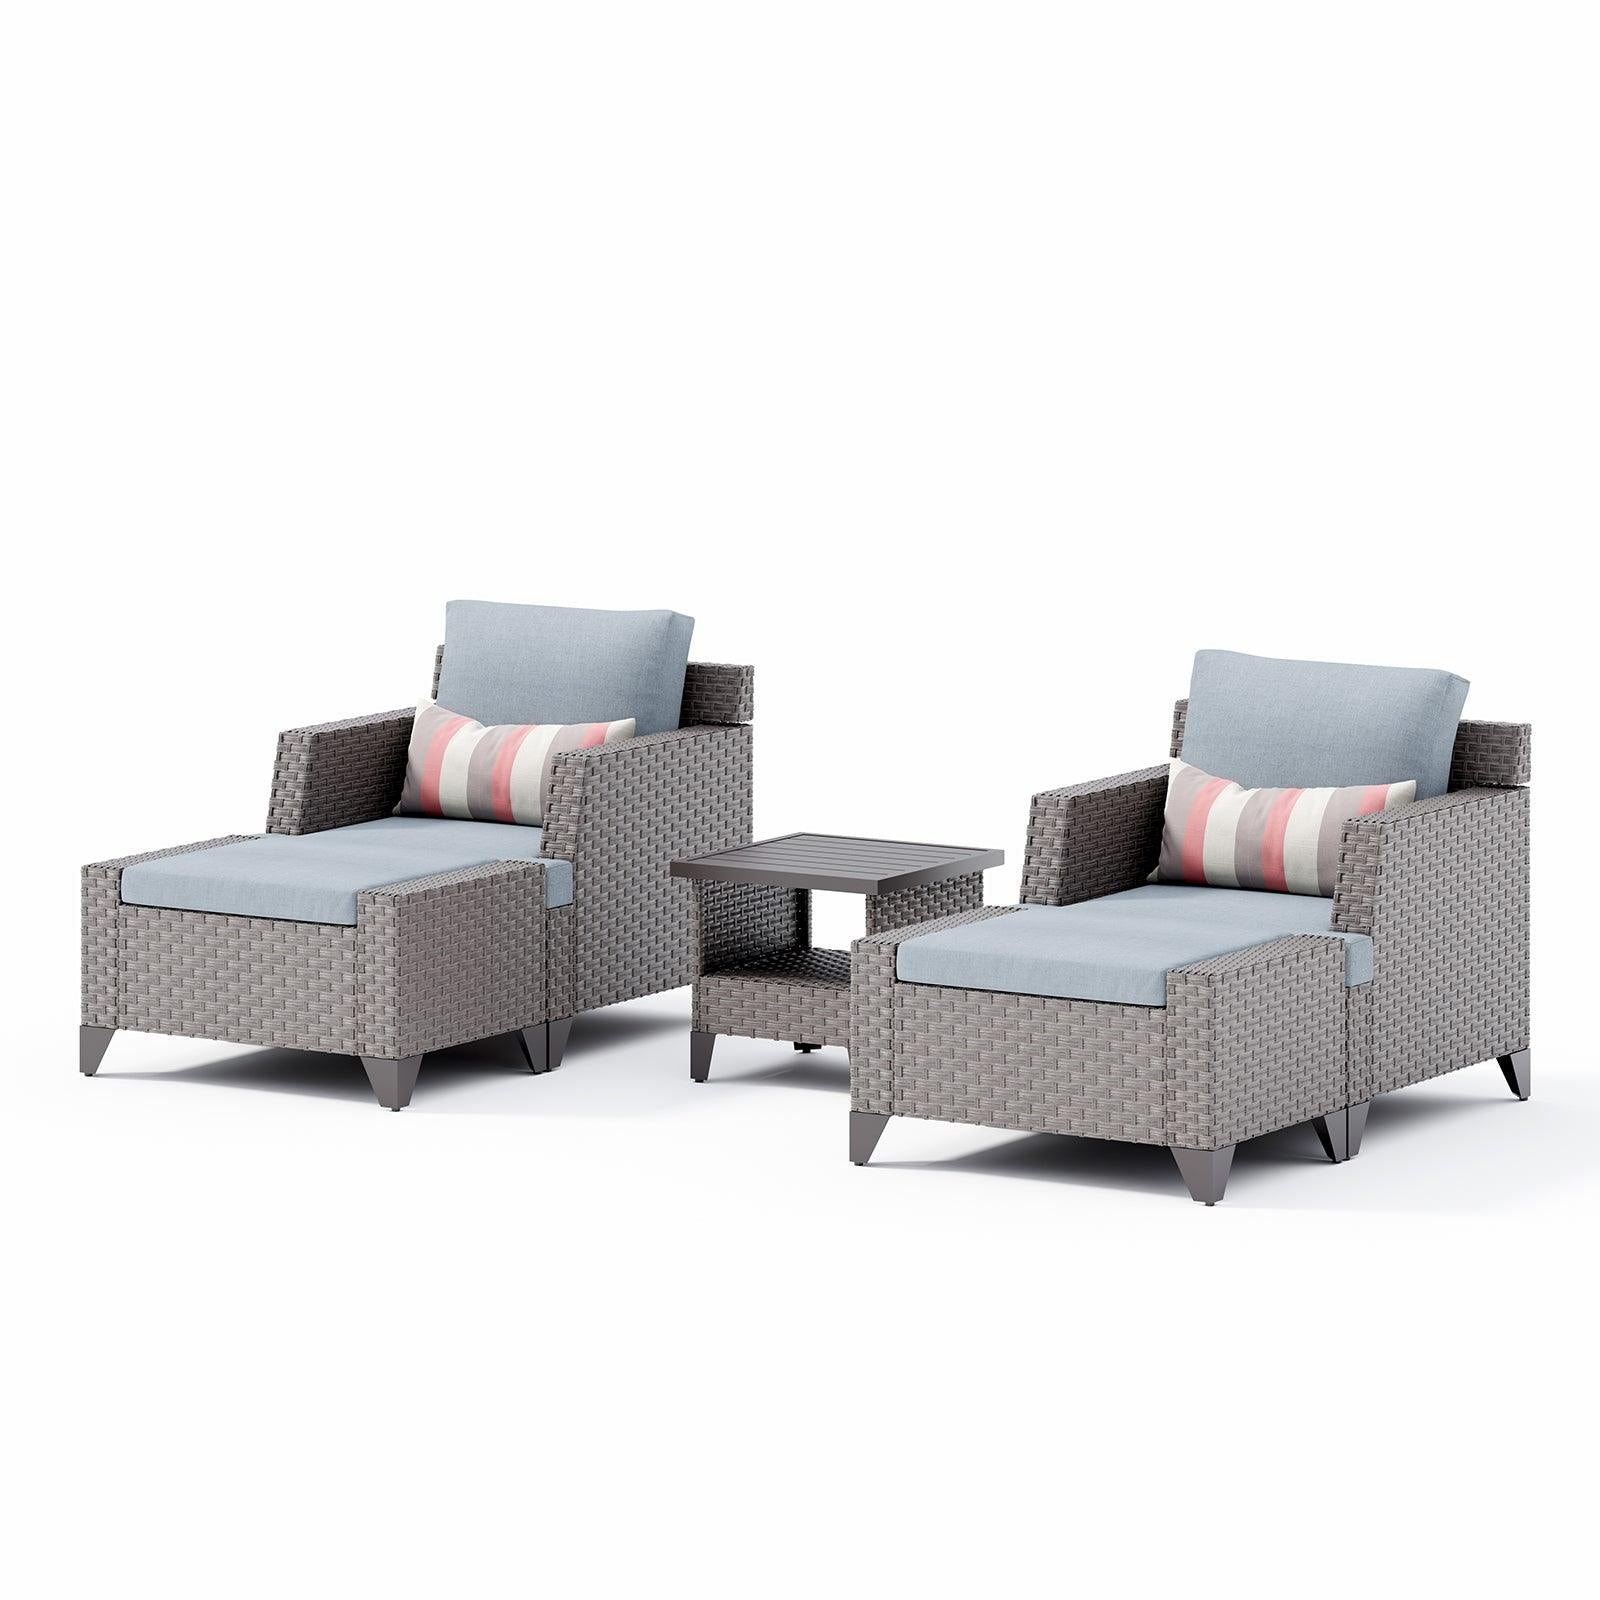 5pcs Wicker Outdoor Conversation Set with Ottomans, Cushions Included | Orange-Casual